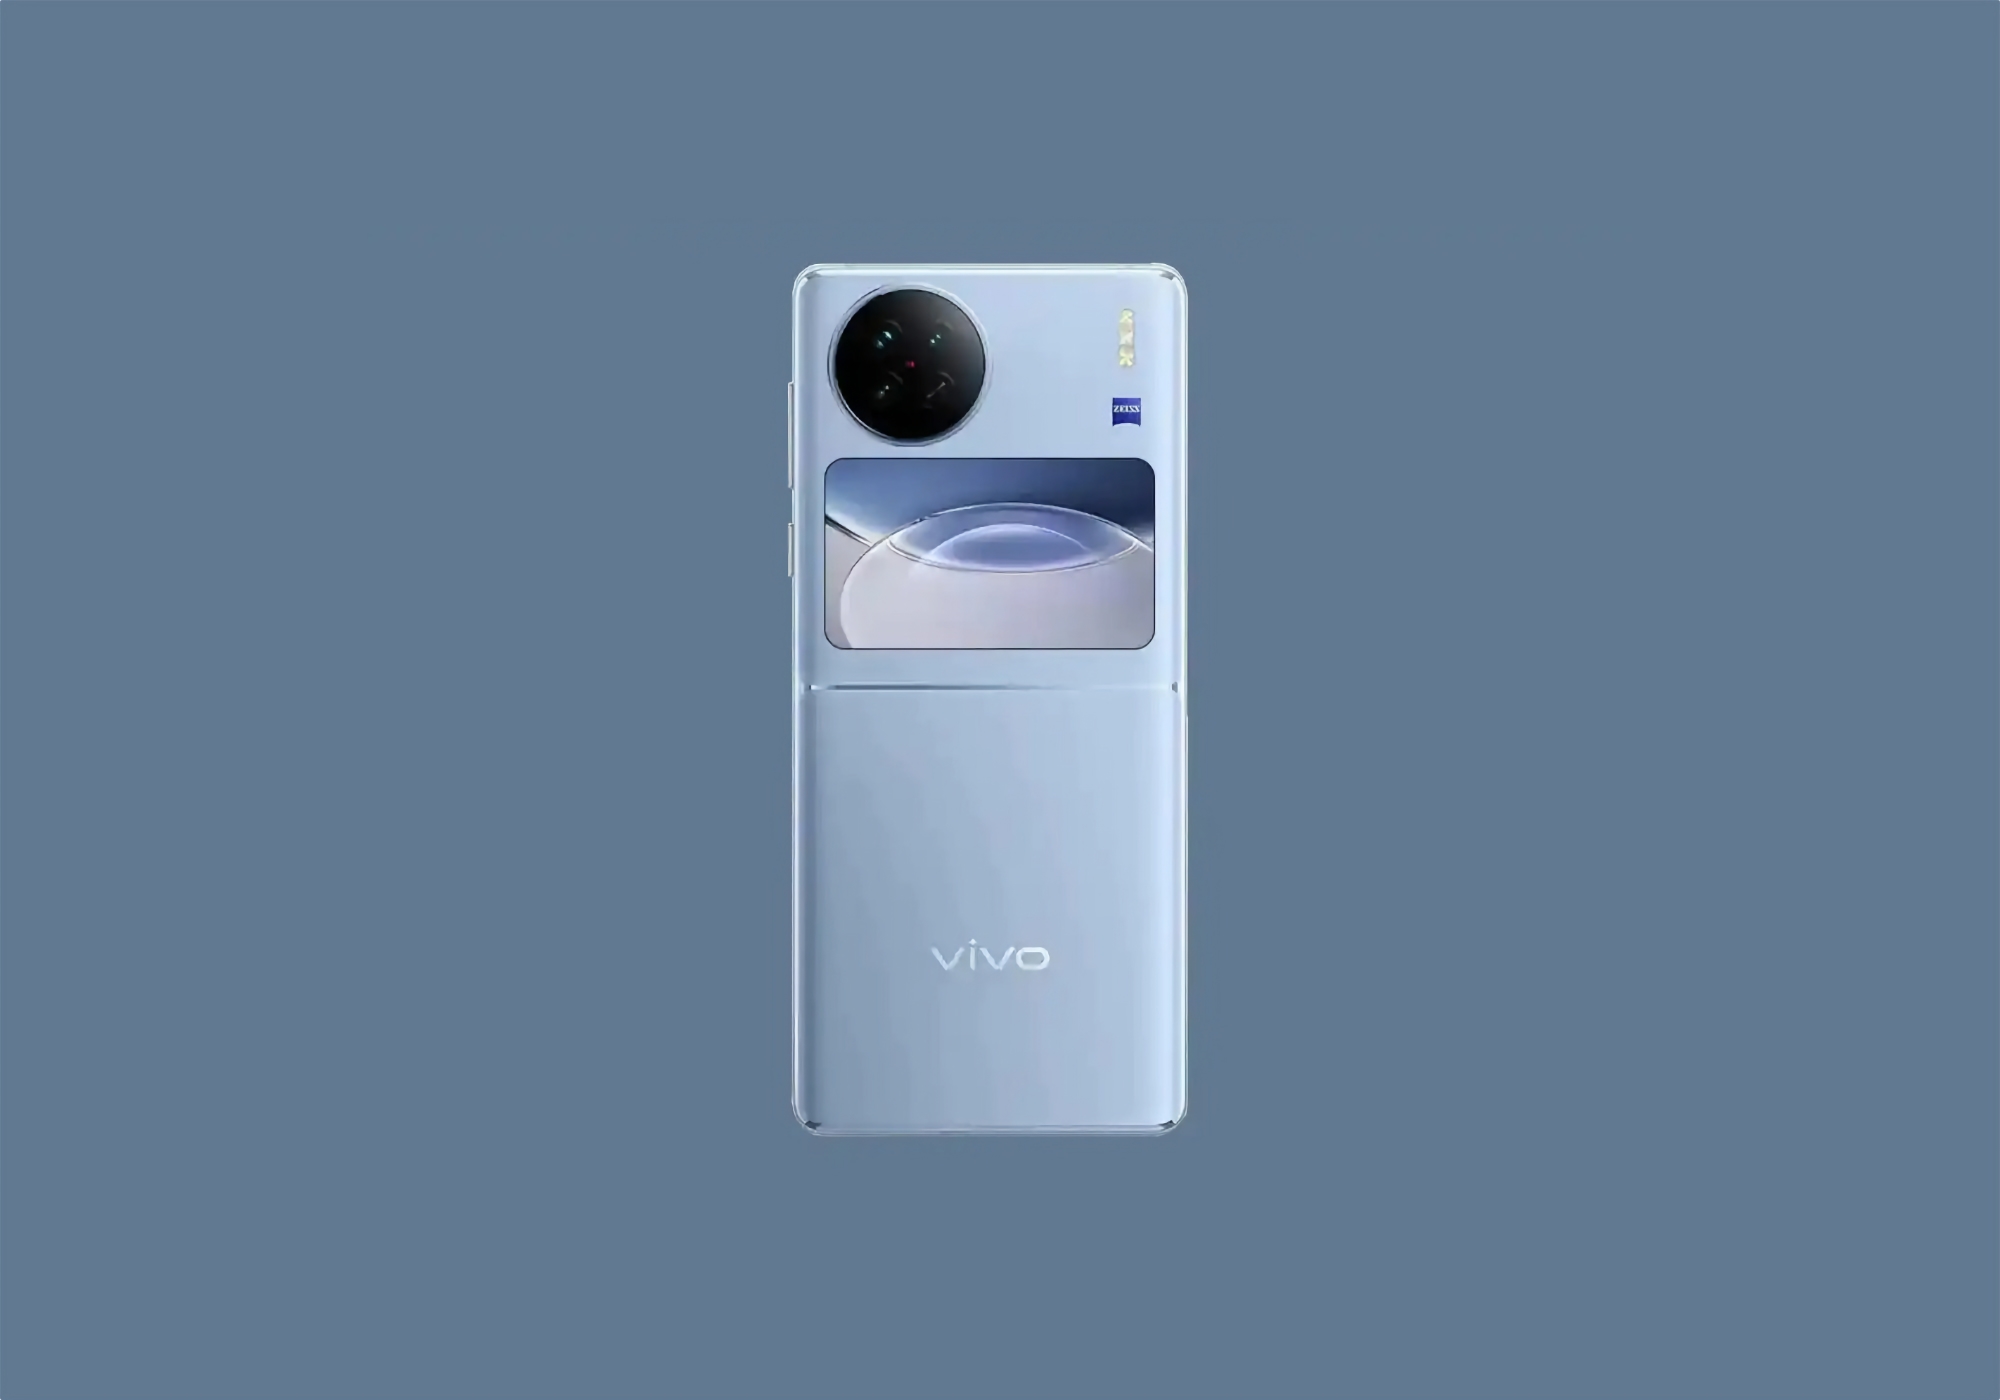 120Hz OLED display, Snapdragon 8+ Gen 1 chip, 50 MP camera and 4400 battery with 44W charging: Insider reveals vivo X Flip cradle specs